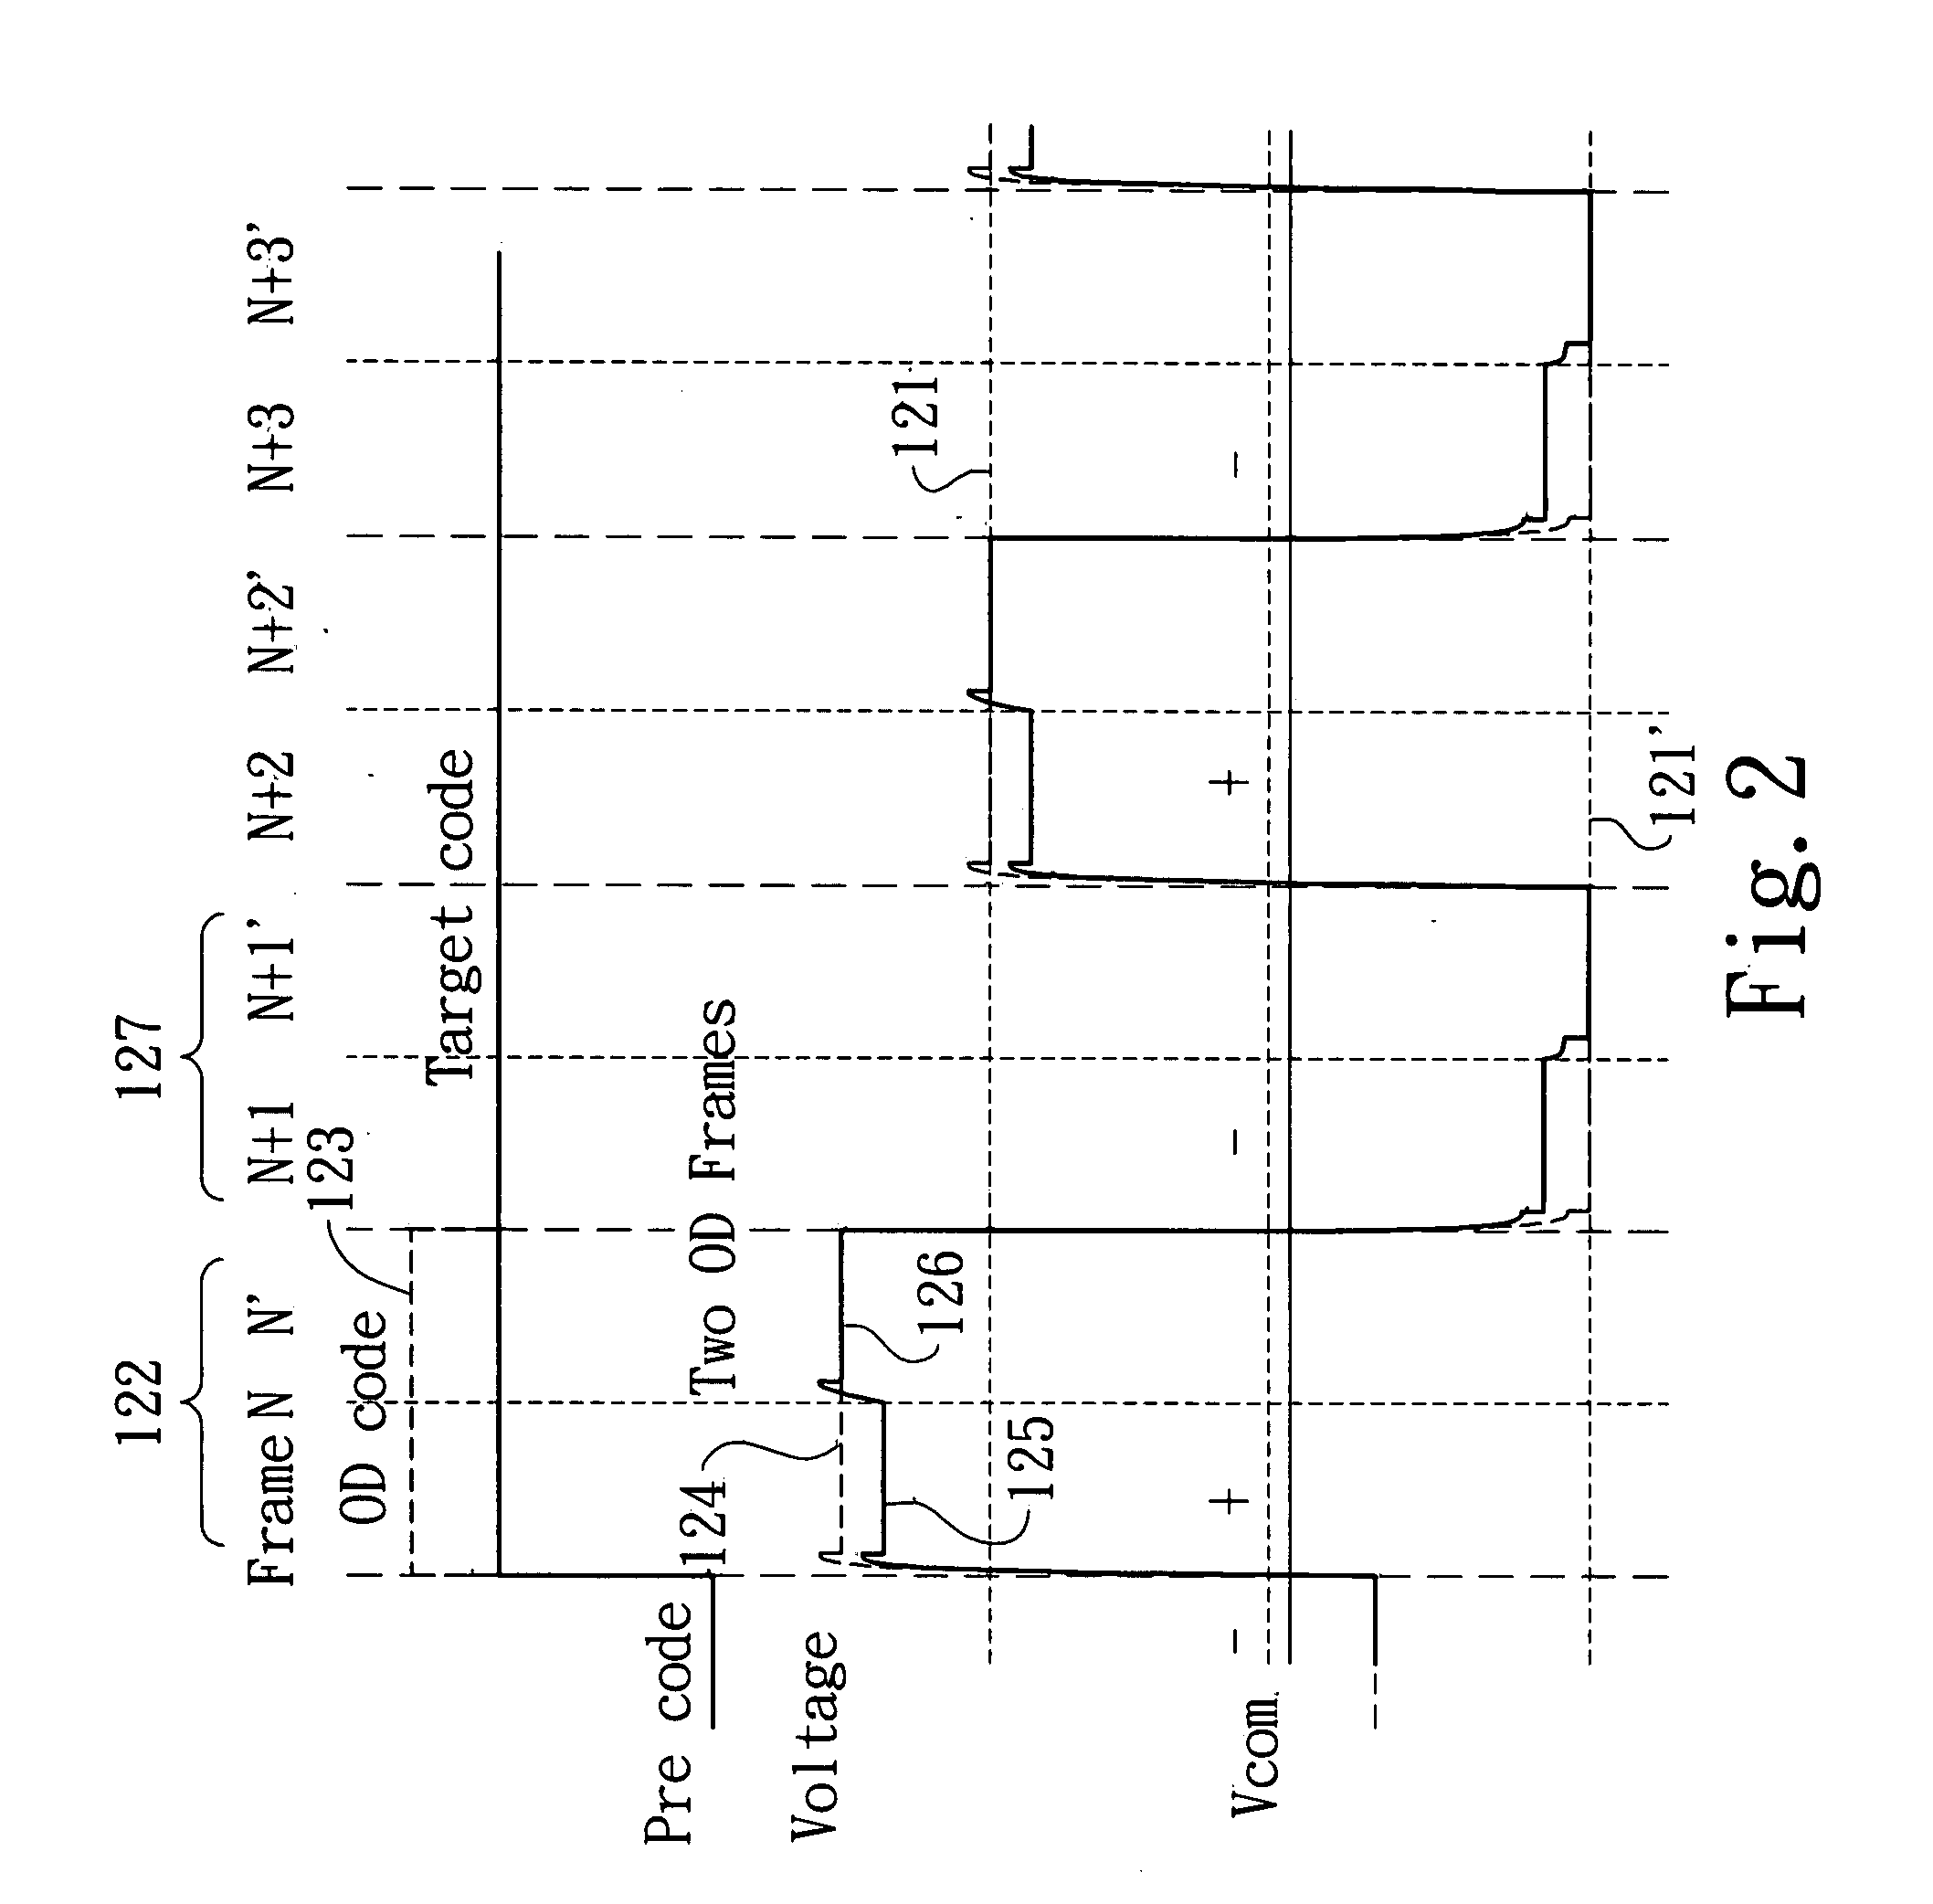 Method for driving liquid crystal display in a multi-frame polarity inversion manner